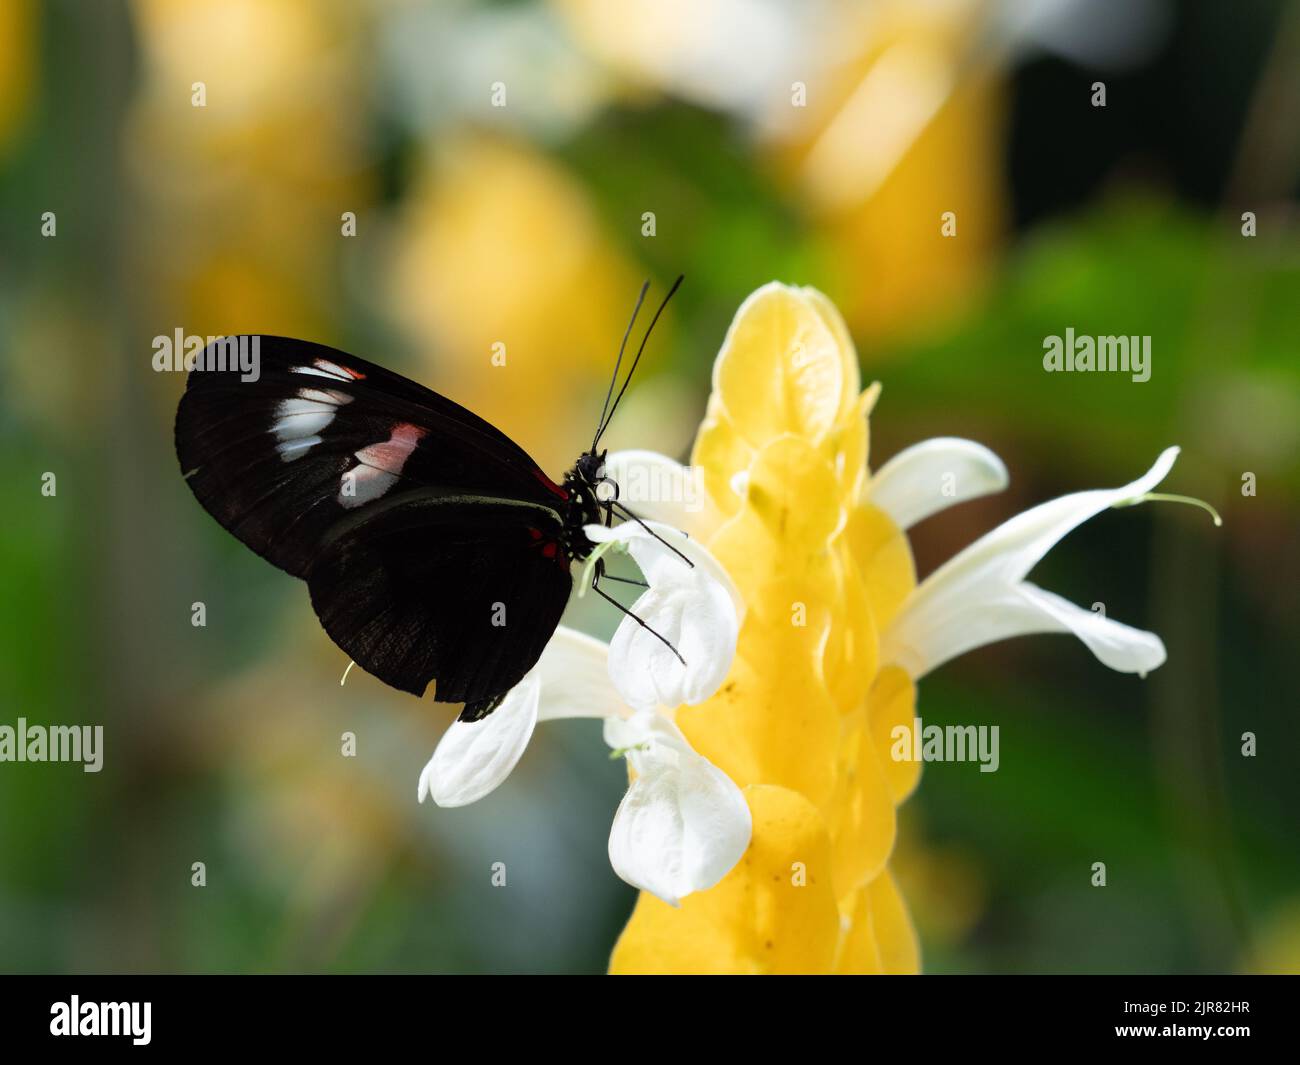 Close up of a black butterfly with white and orange spots on closed wings, a Red Postman or Heliconius erato, perched on a yellow shrimp plant flower. Stock Photo